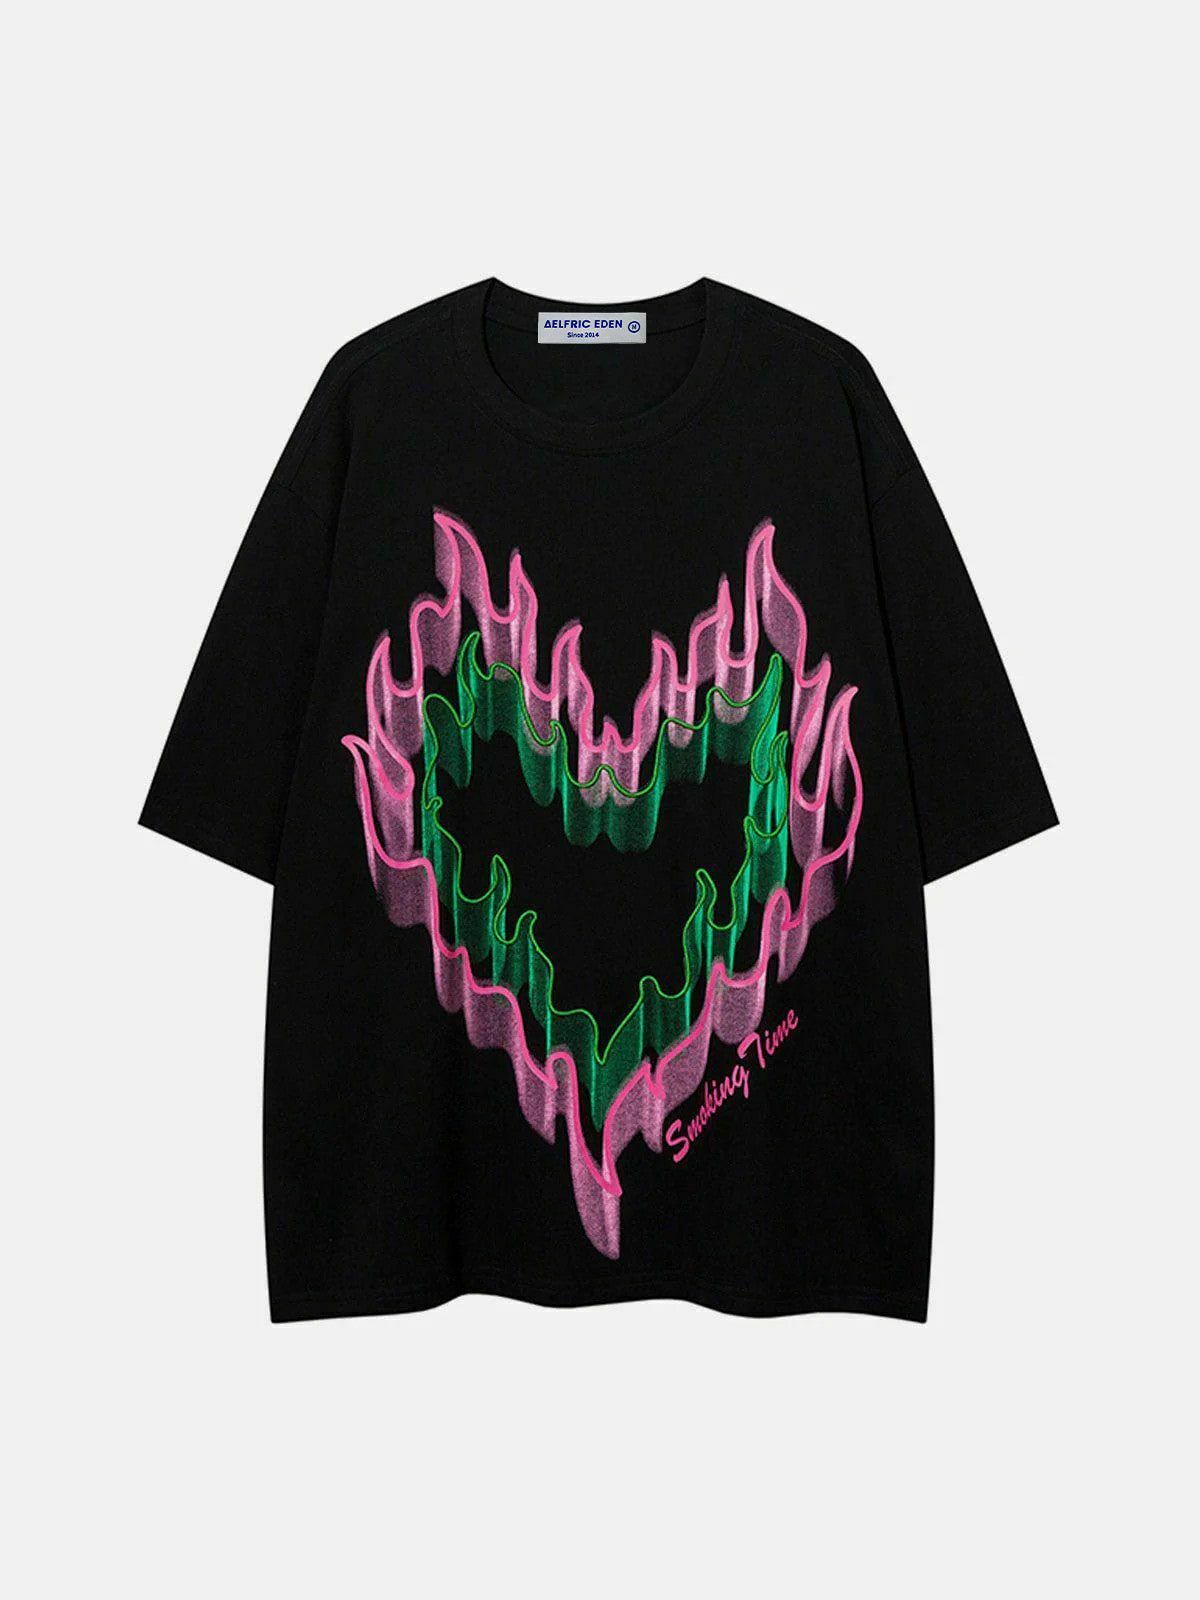 dynamic 3d flame graphic tee   youthful urban style 2786